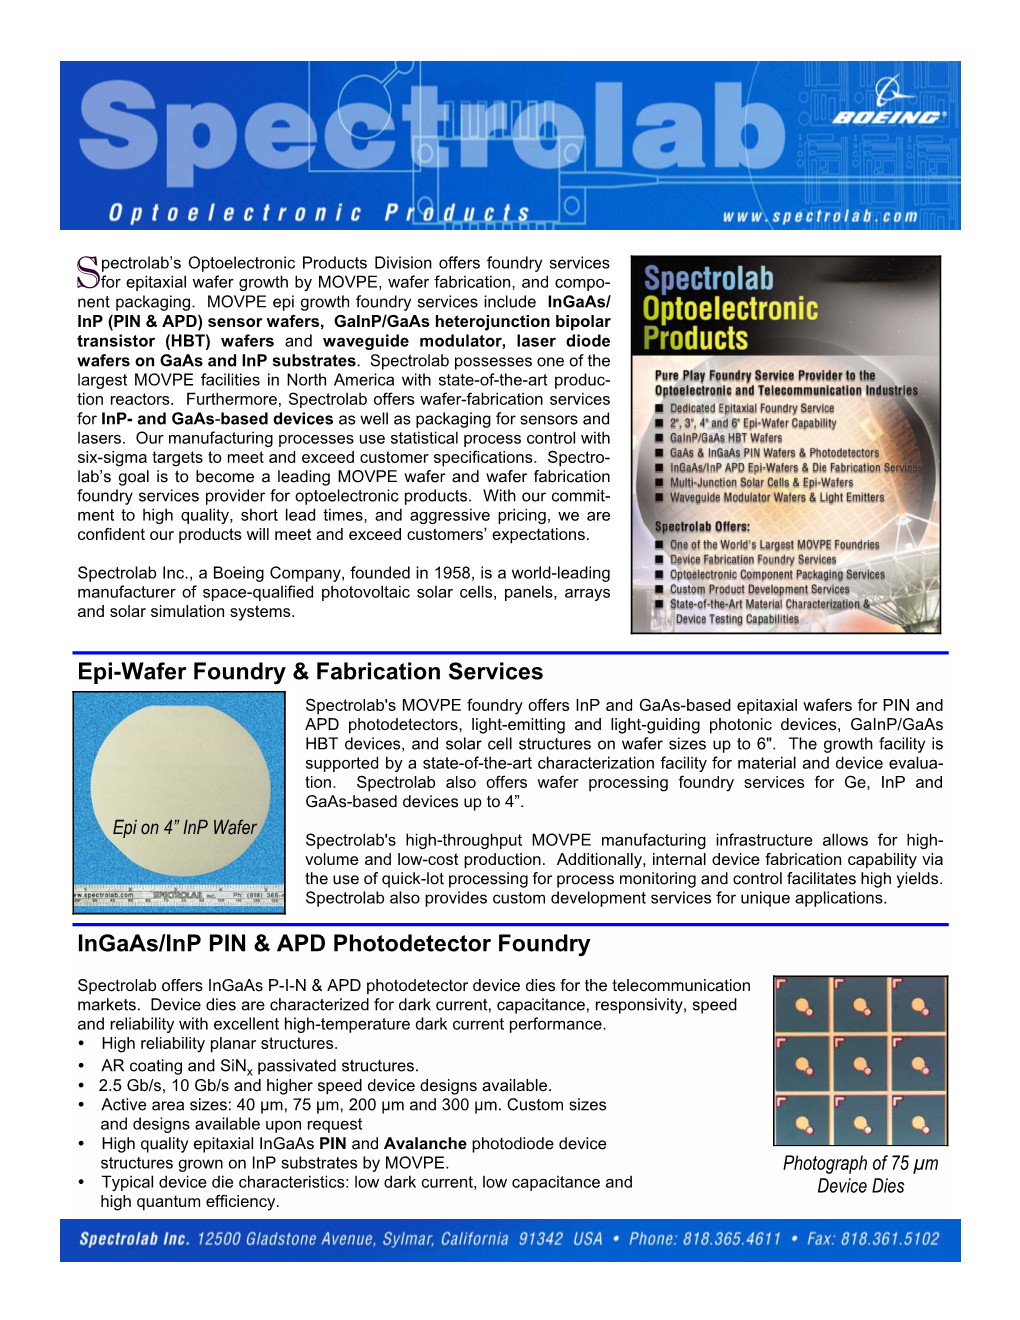 Spectrolab's Optoelectronic Products Division Offers Foundry Services